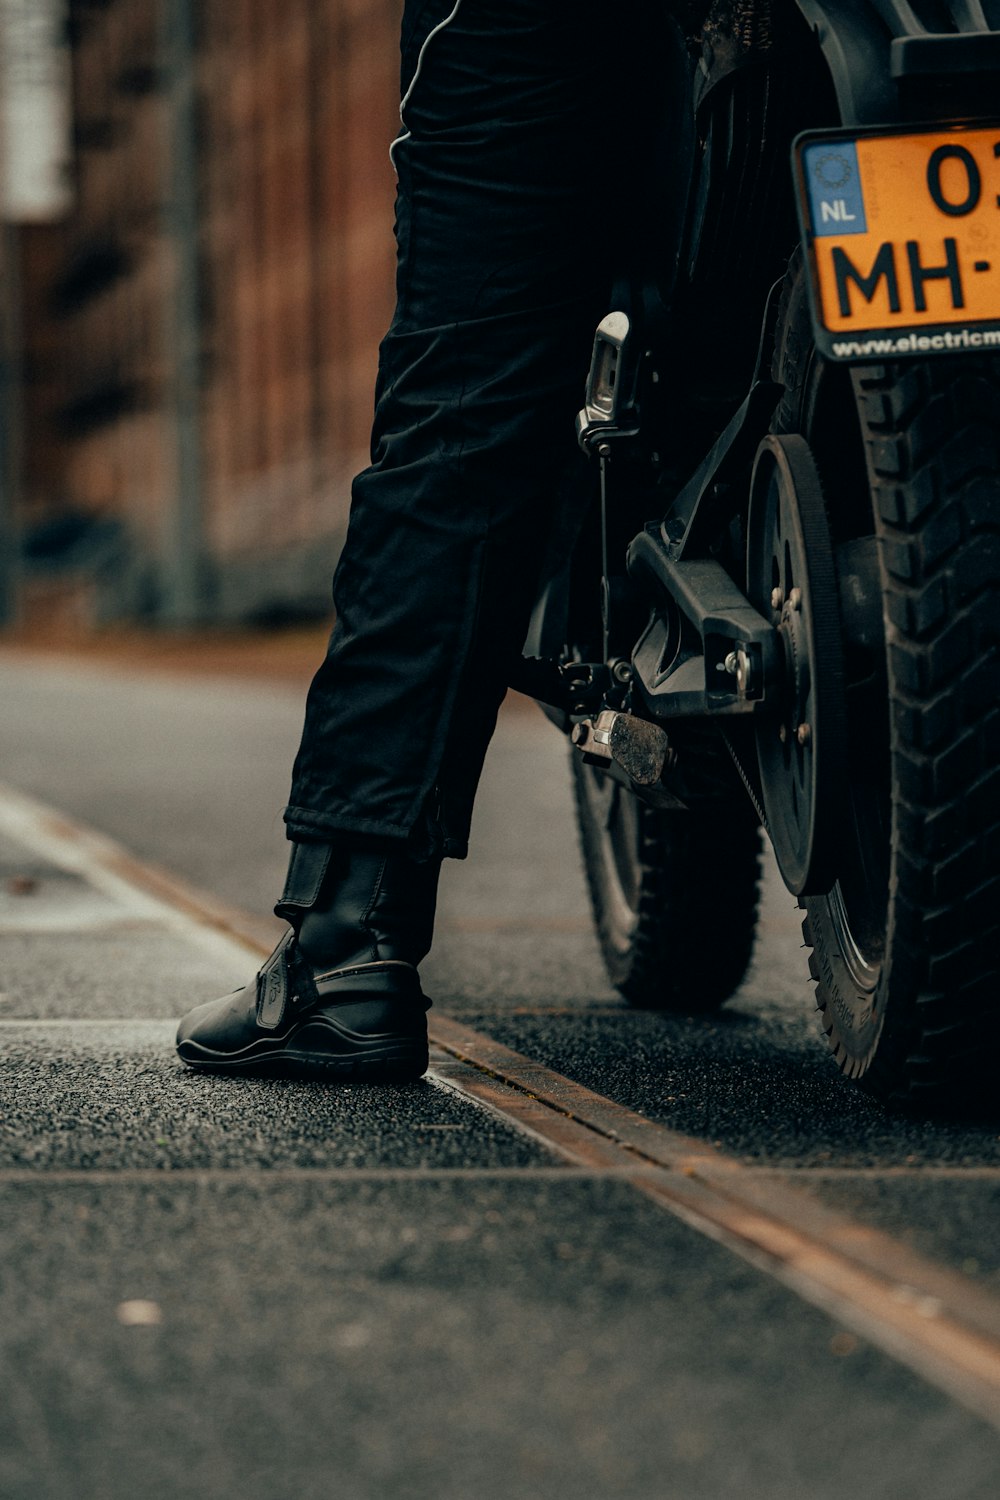 person in black leather boots riding motorcycle on road during daytime